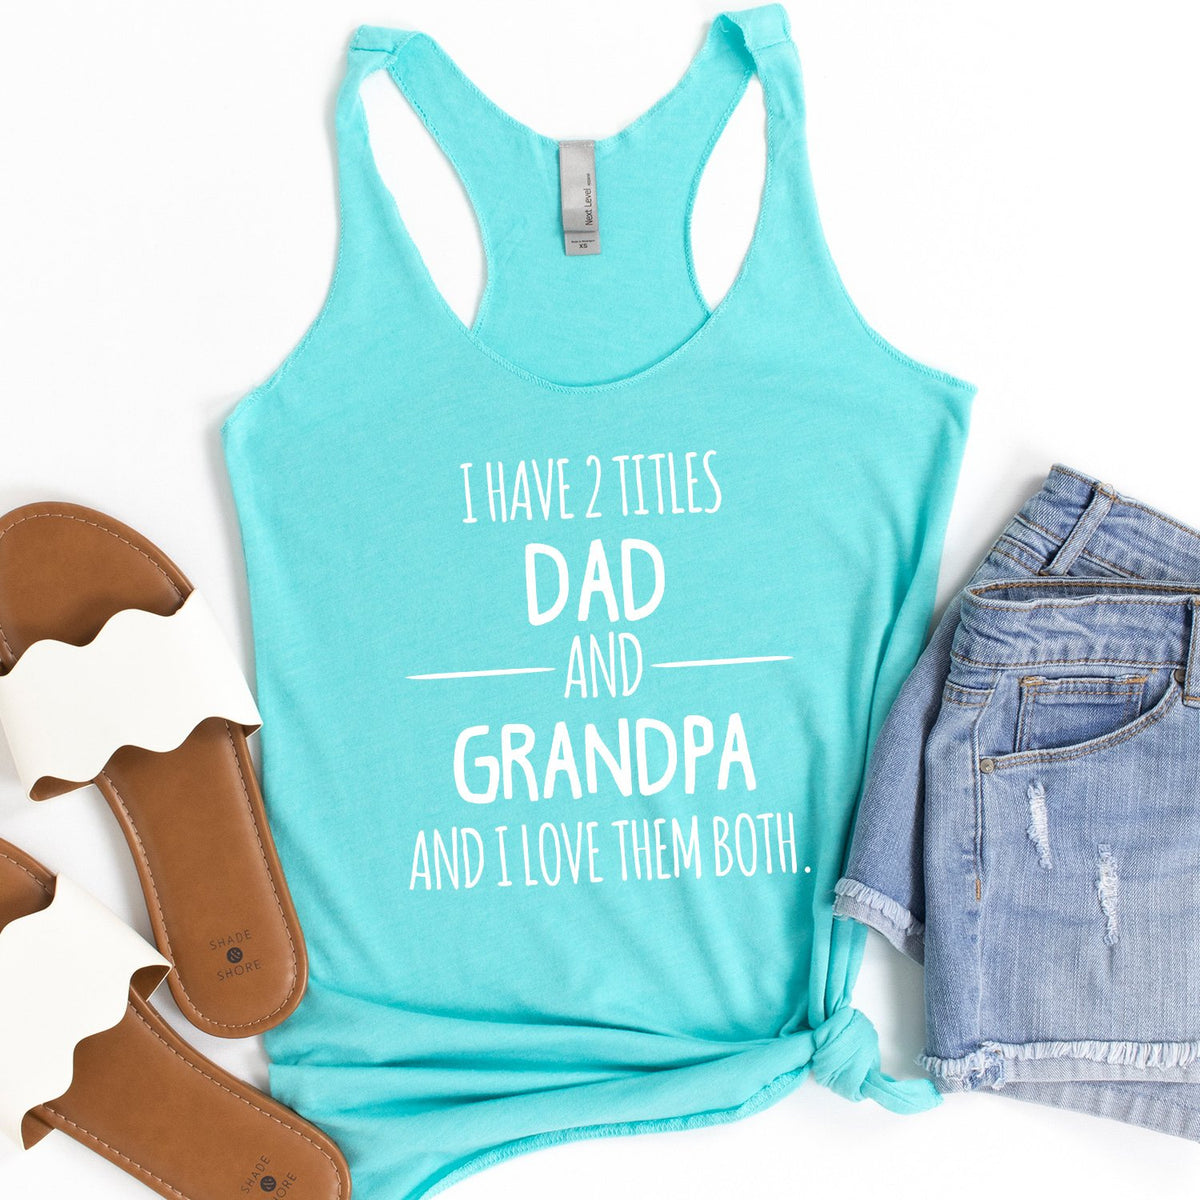 I Have 2 Titles Dad and Grandpa and I Love Them Both - Tank Top Racerback